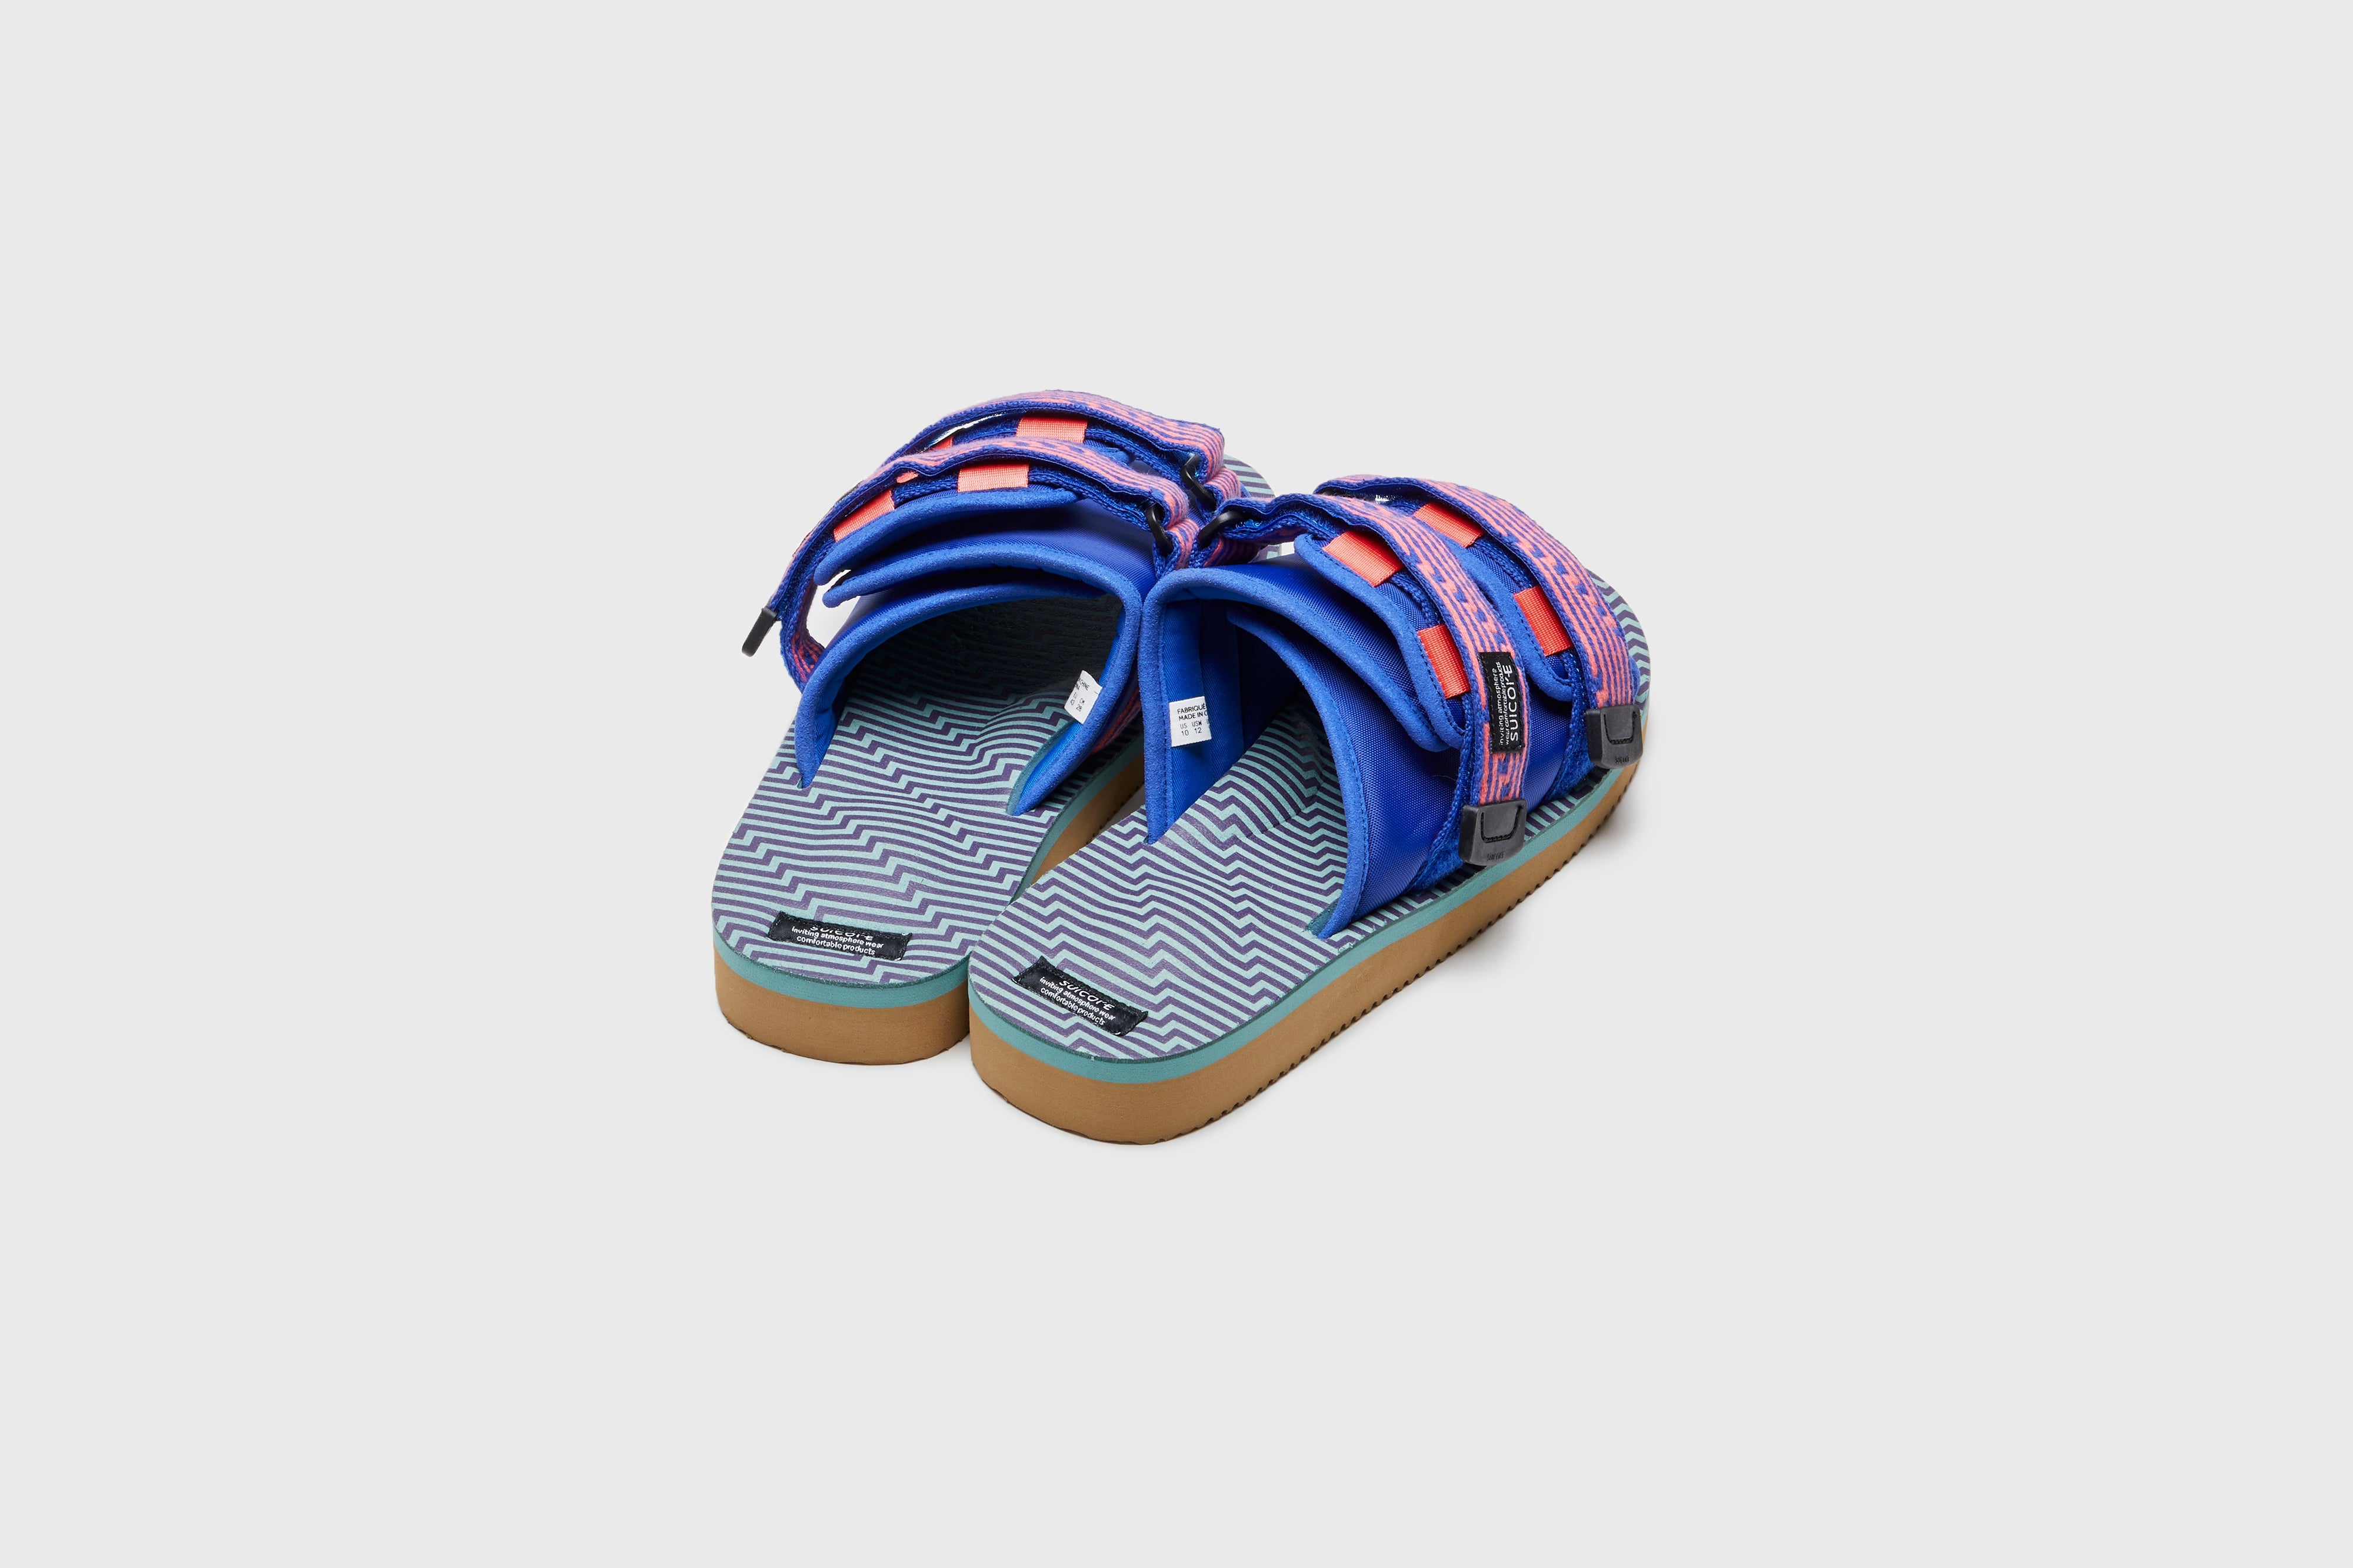 SUICOKE MOTO-JC01 slides with orange & blue nylon upper, orange & blue midsole and sole, strap and logo patch. From Spring/Summer 2023 collection on eightywingold Web Store, an official partner of SUICOKE. OG-056-JC01 ORANGE X BLUE